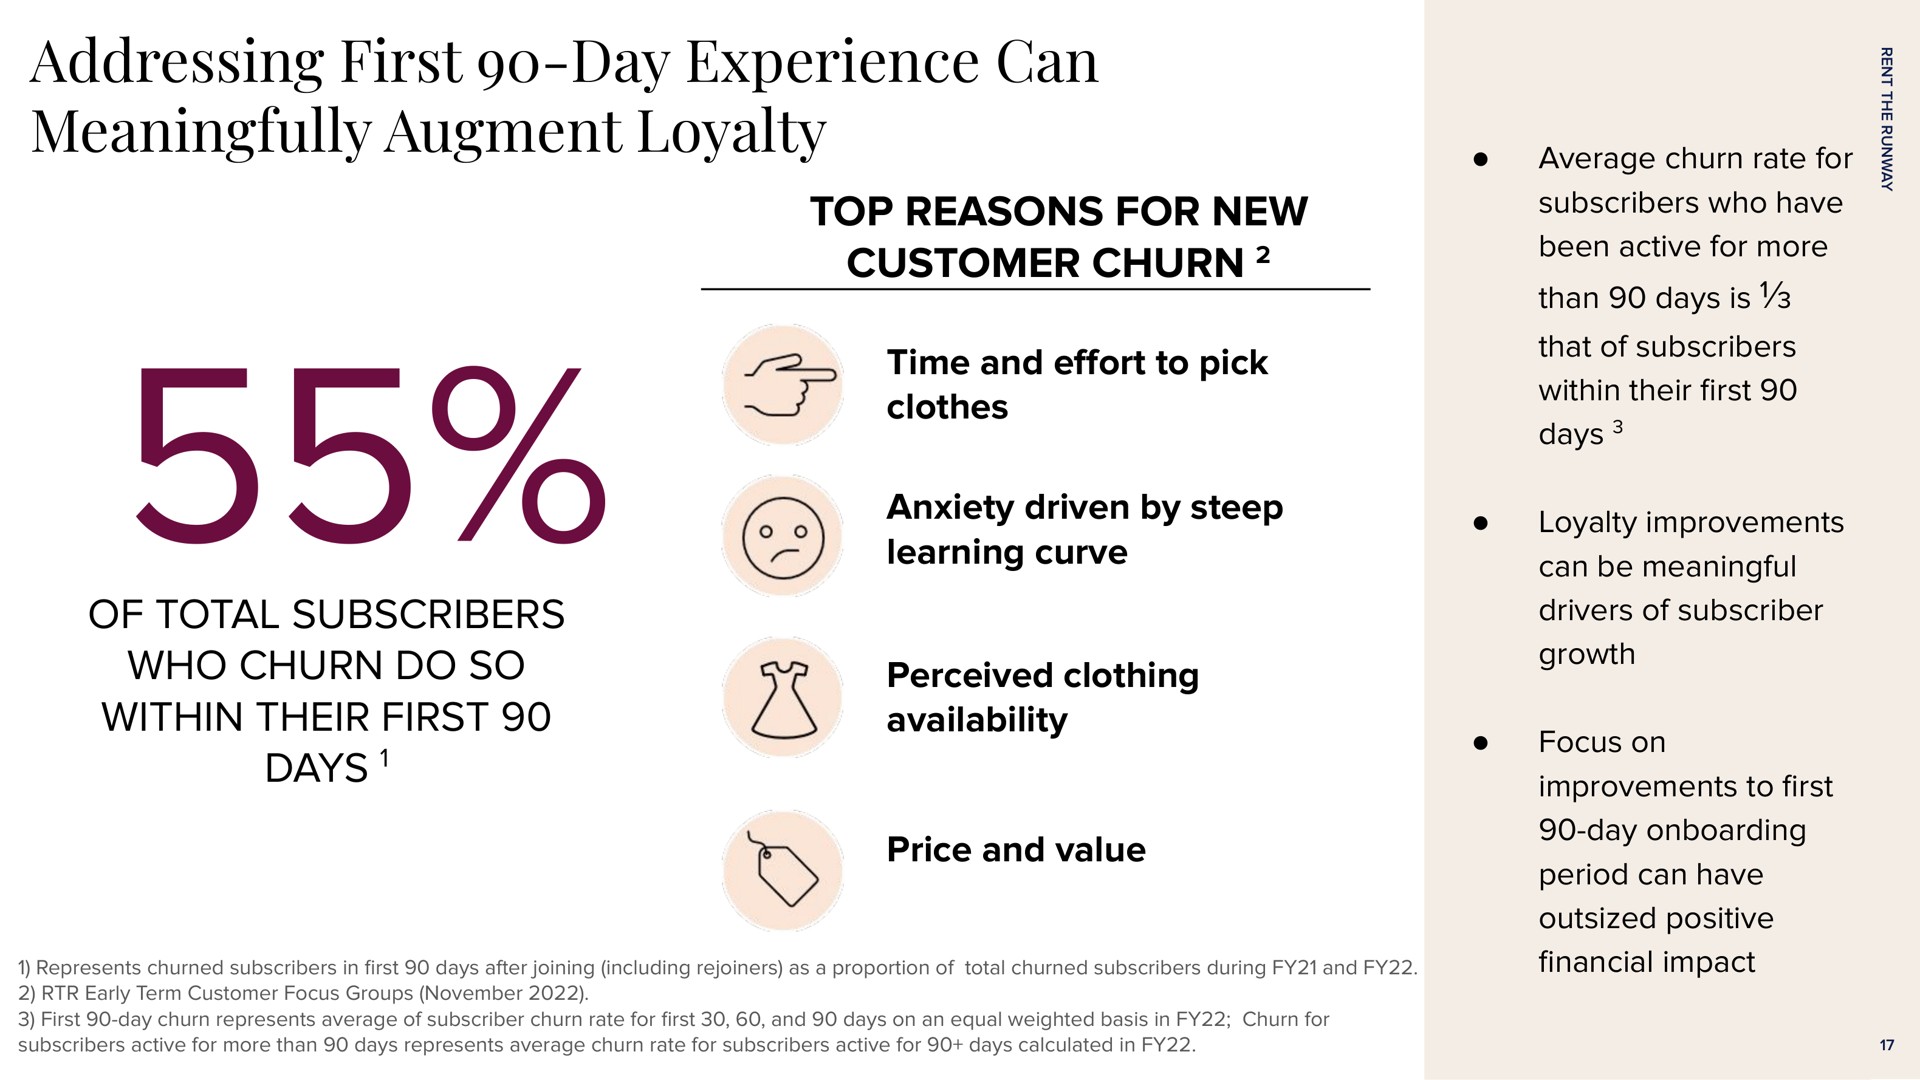 addressing first day experience can meaningfully augment loyalty of total subscribers who churn do so within their first days top reasons for new customer churn time and ort to pick clothes anxiety driven by steep learning curve perceived clothing availability price and value | Rent The Runway